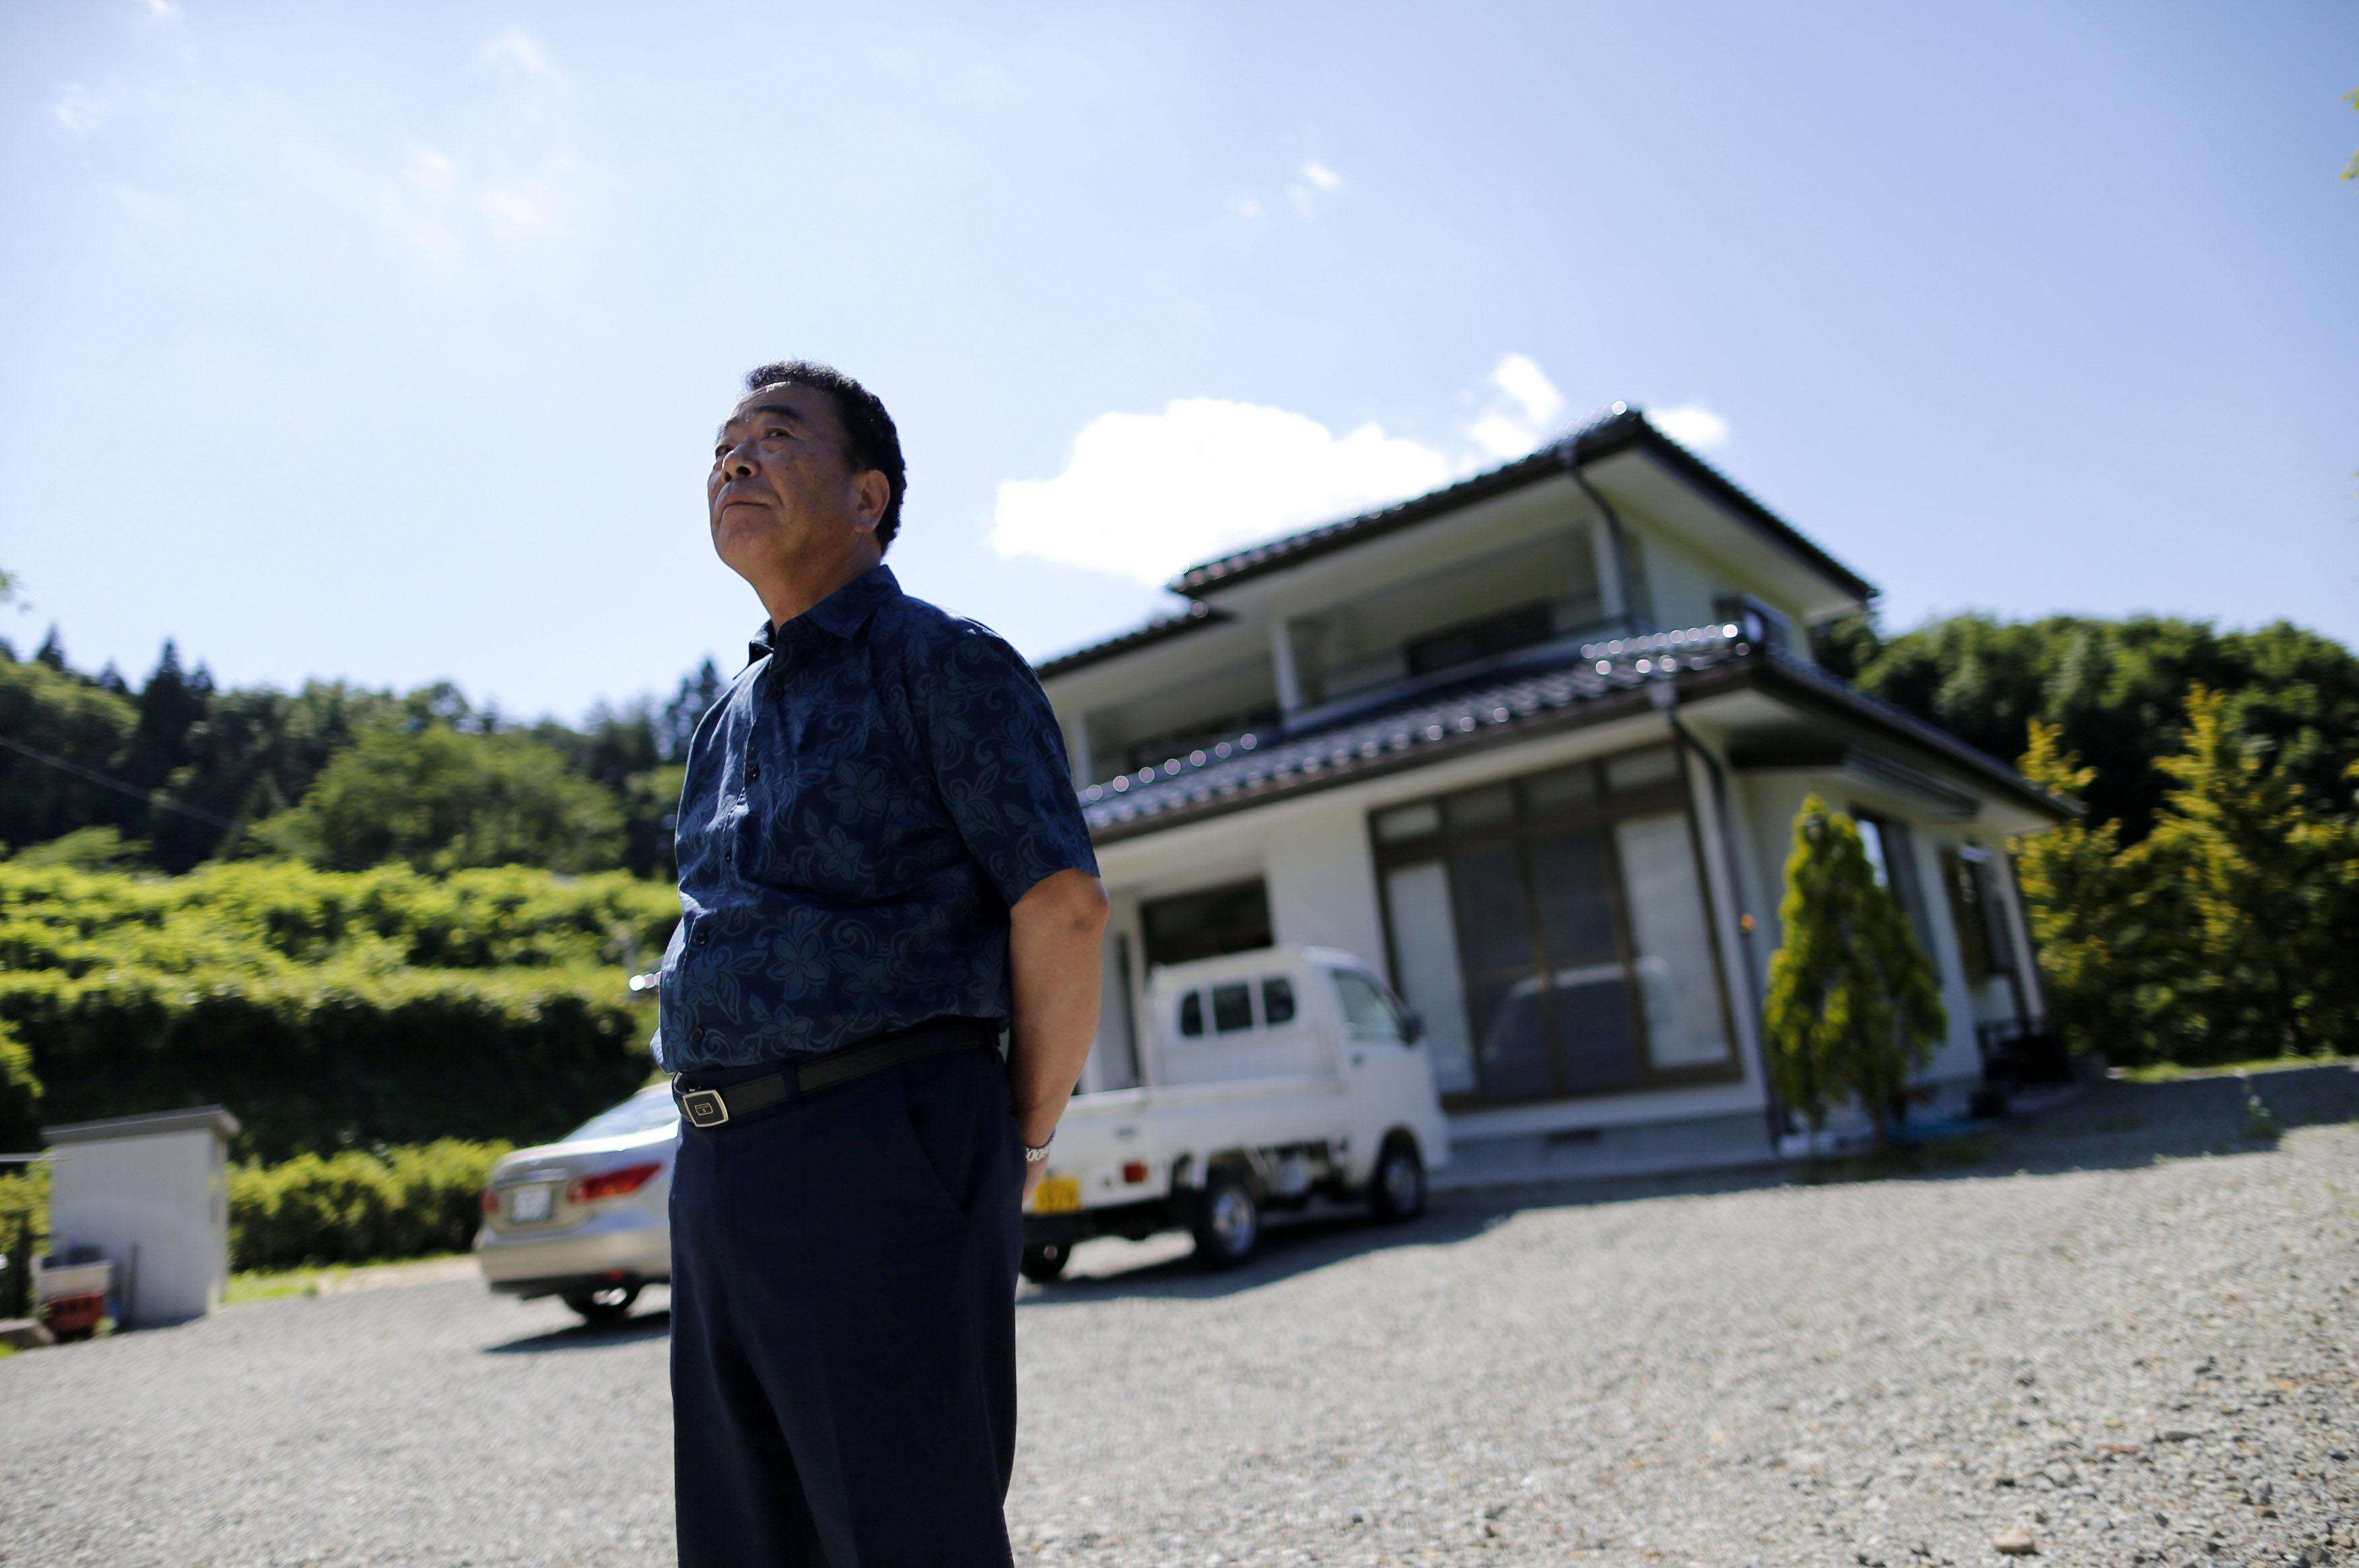 Mikio Watanabe's house in Kawamata, Fukushima Prefecture, remains in an exclusion zone and all he can do is maintain it during short visits. Being unemployed and forced to live elsewhere was too much for his wife, who burned herself to death during what she thought would be their final stay at the house. | REUTERS